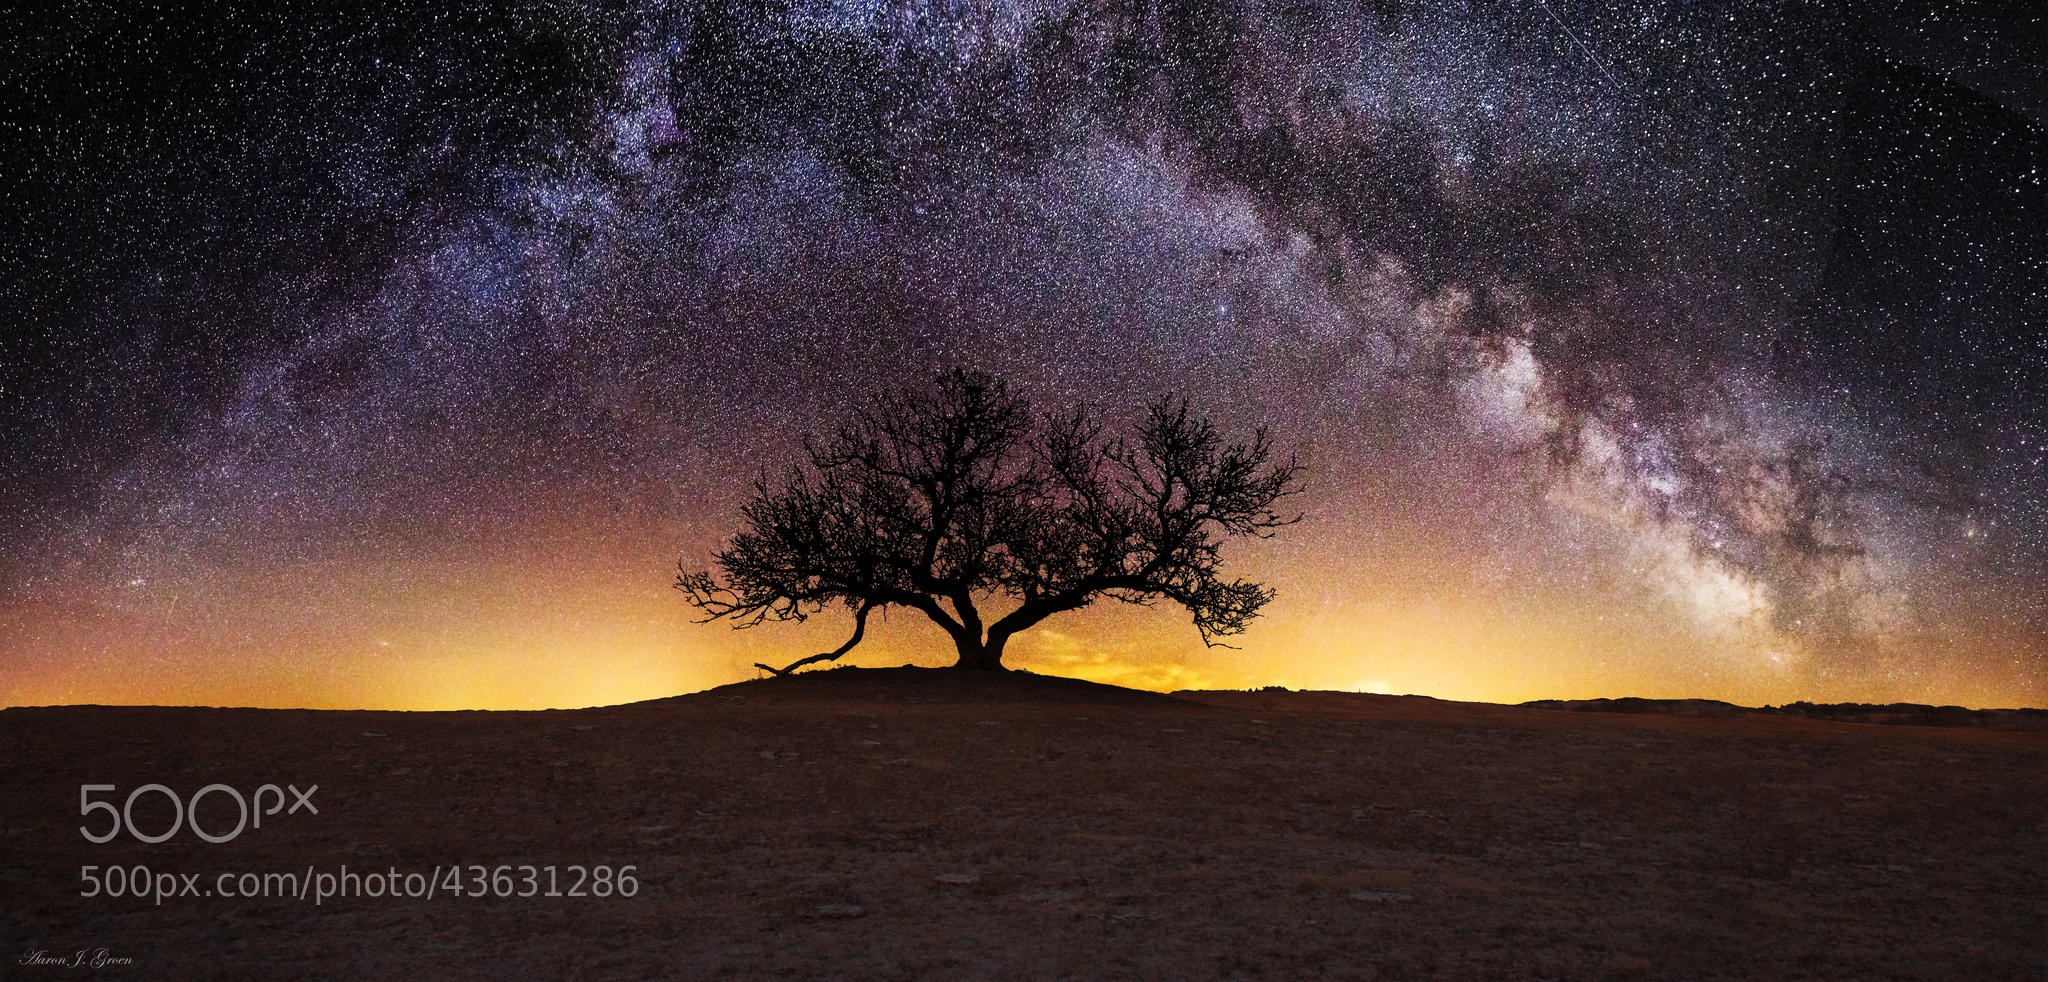 General 2048x982 trees sky 500px stars nature